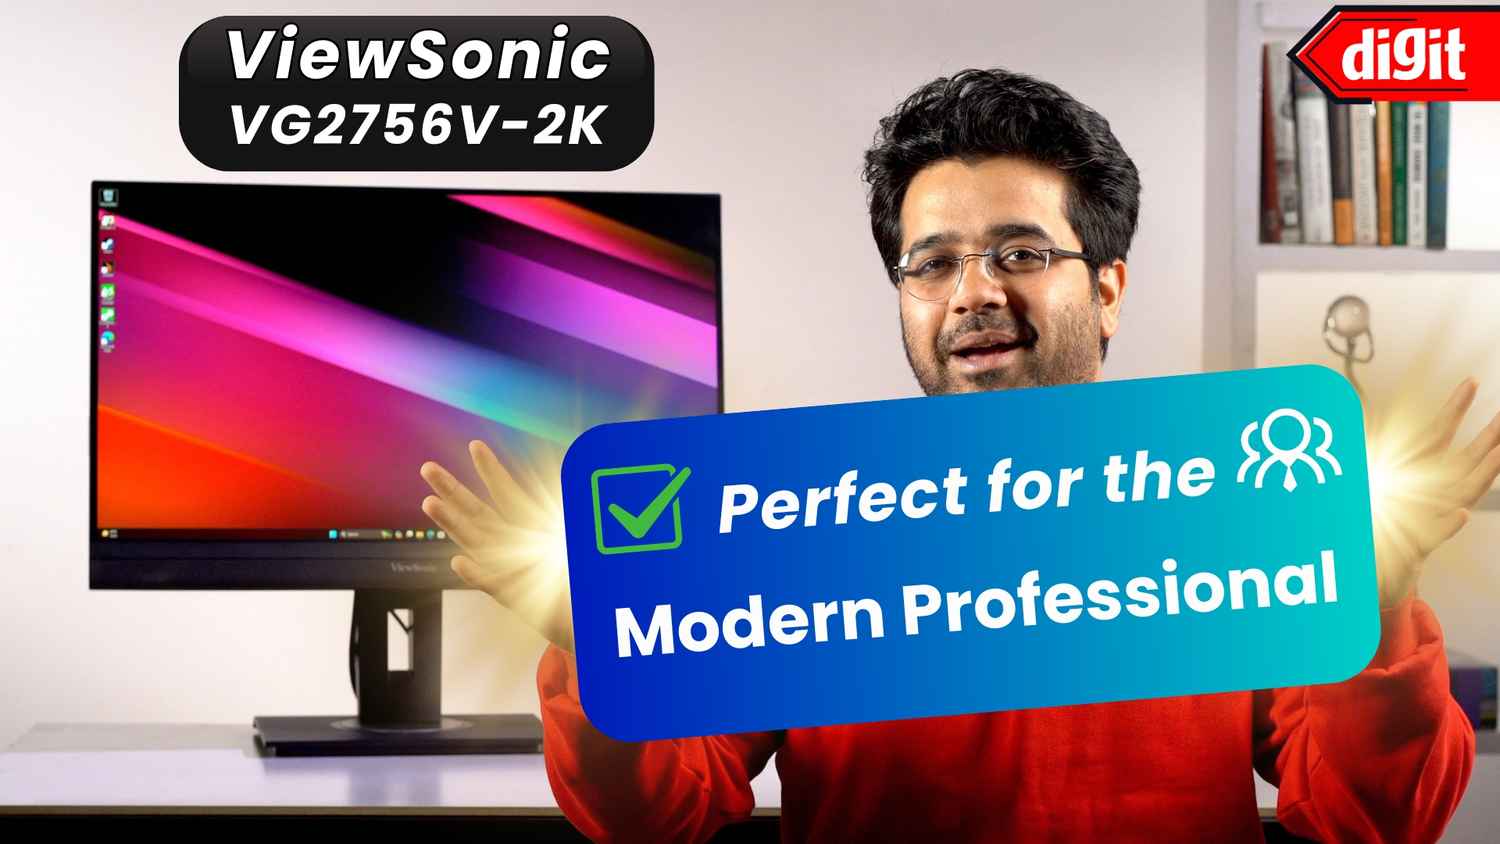 Here’s why ViewSonic VG2756V-2K is perfect for modern professionals